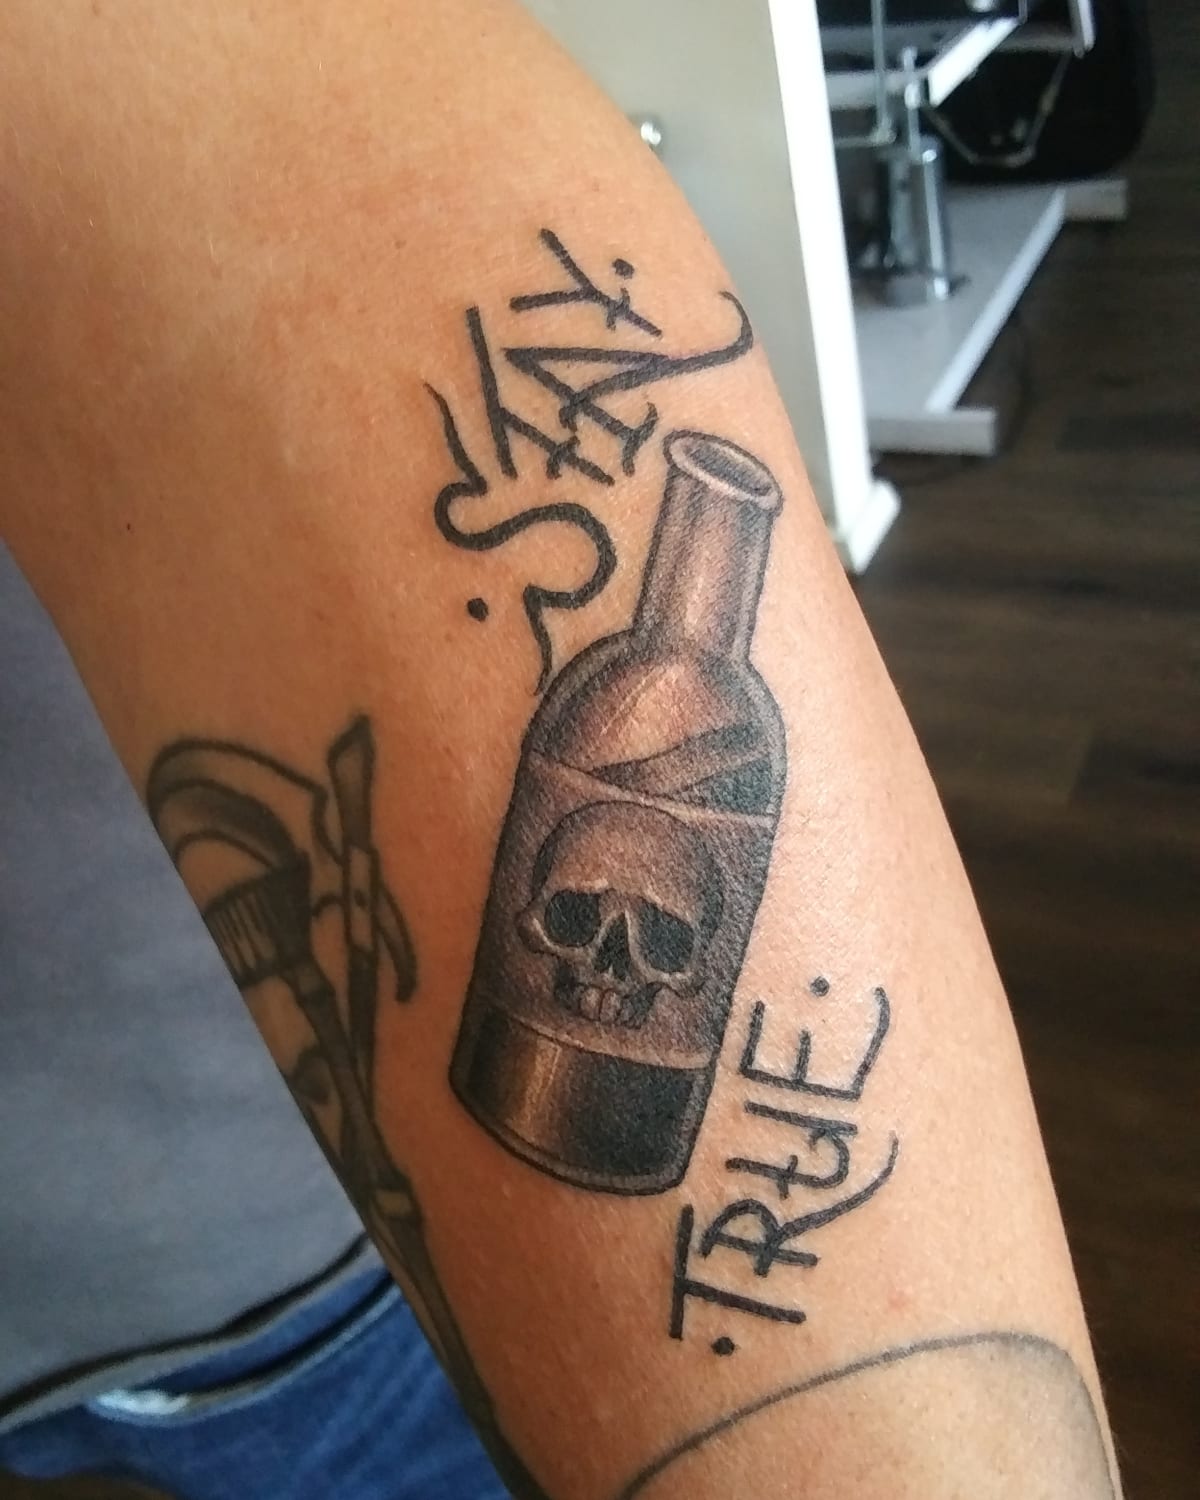 I'll have 3 years sober Match 11th 2021! By Sammy at Grape Ape Tattoo in Tucson AZ.